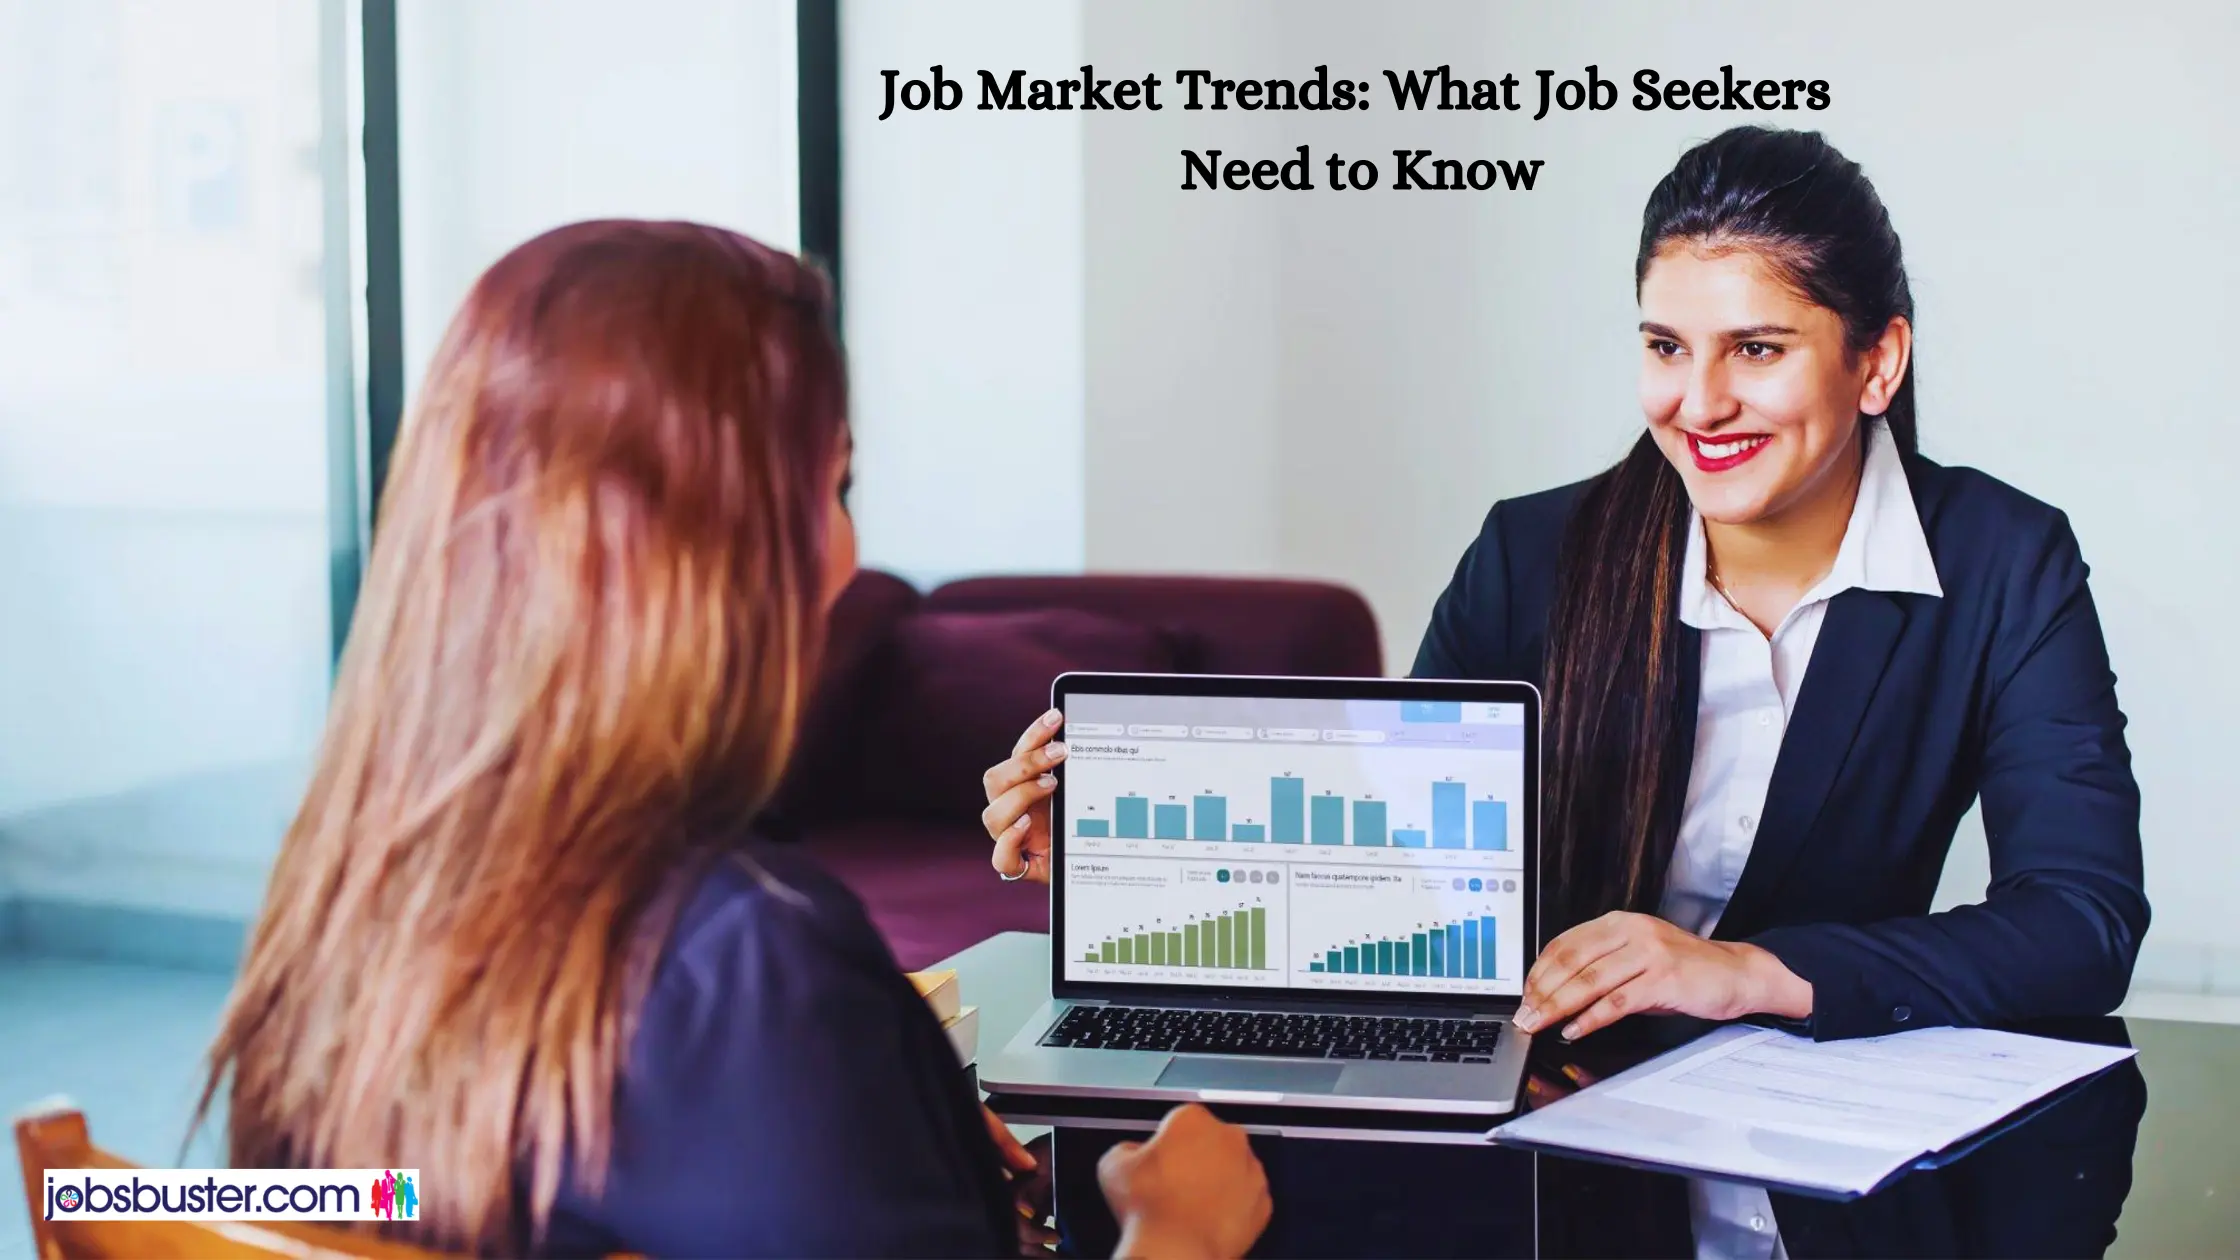 Job Market Trends: What Job Seekers Need to Know